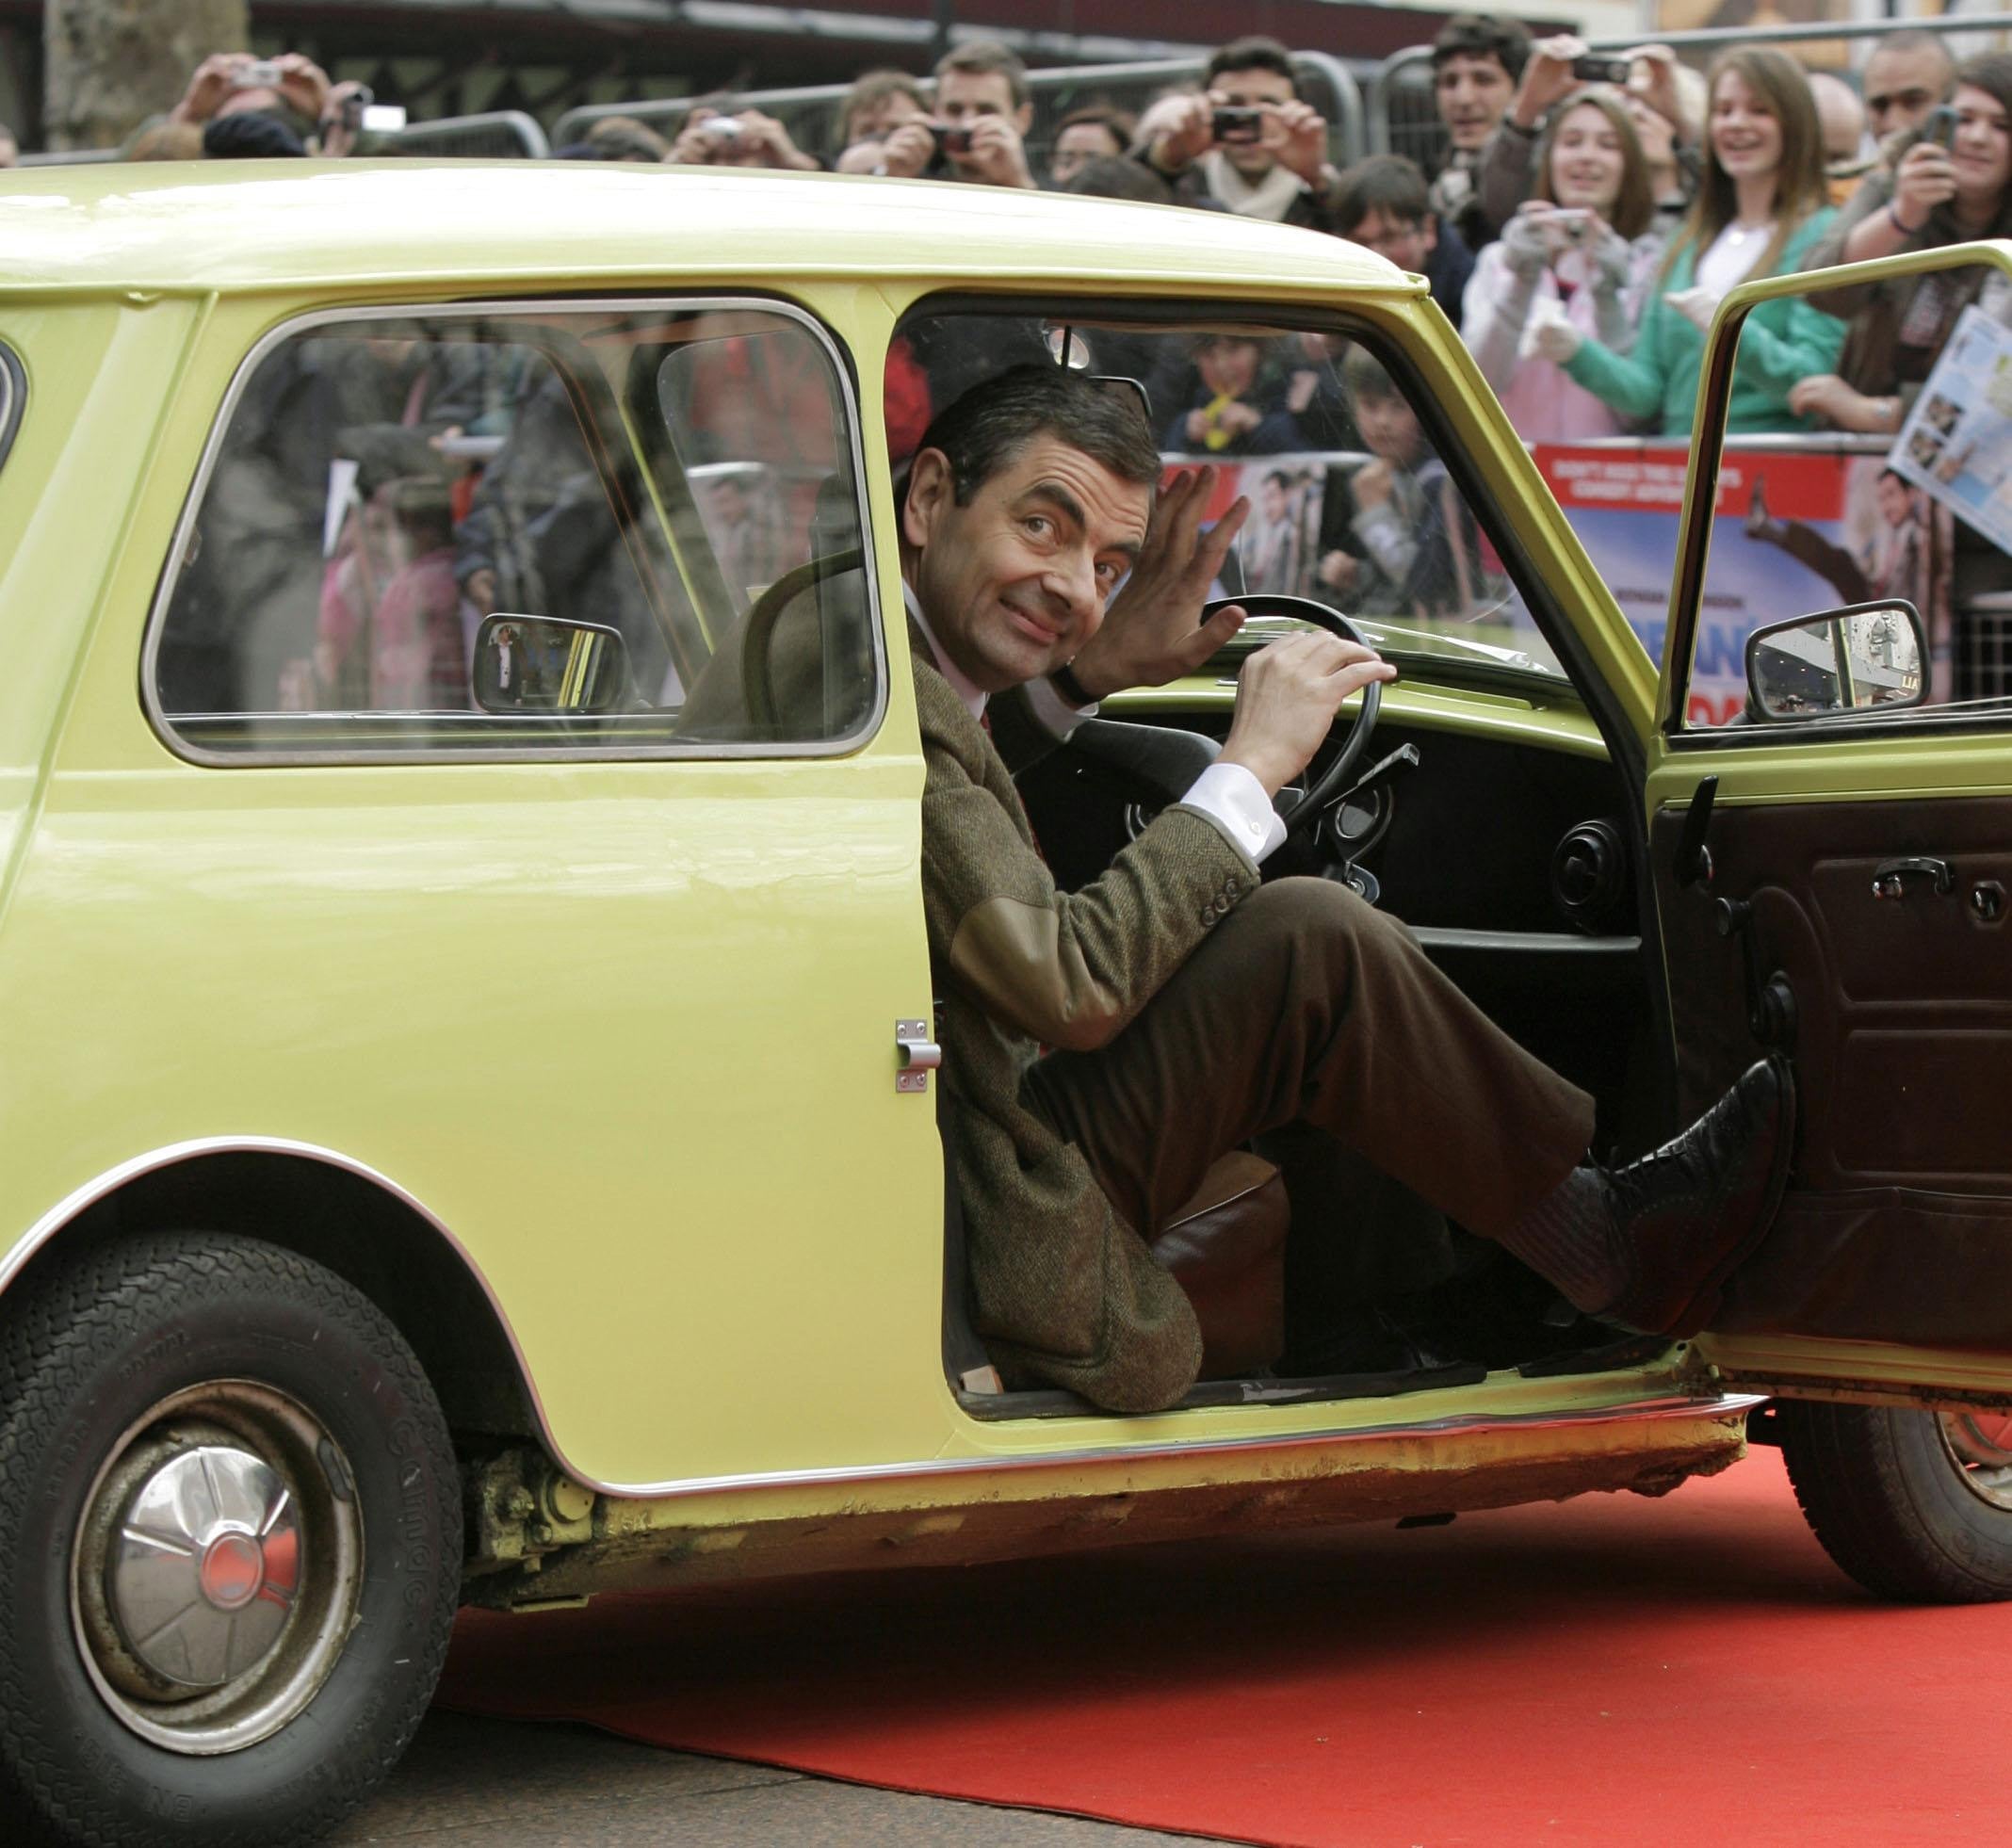 In the coming clampdown on motorists, Rowan Atkinson, like Captain Blackadder, is one of the first to go over the top